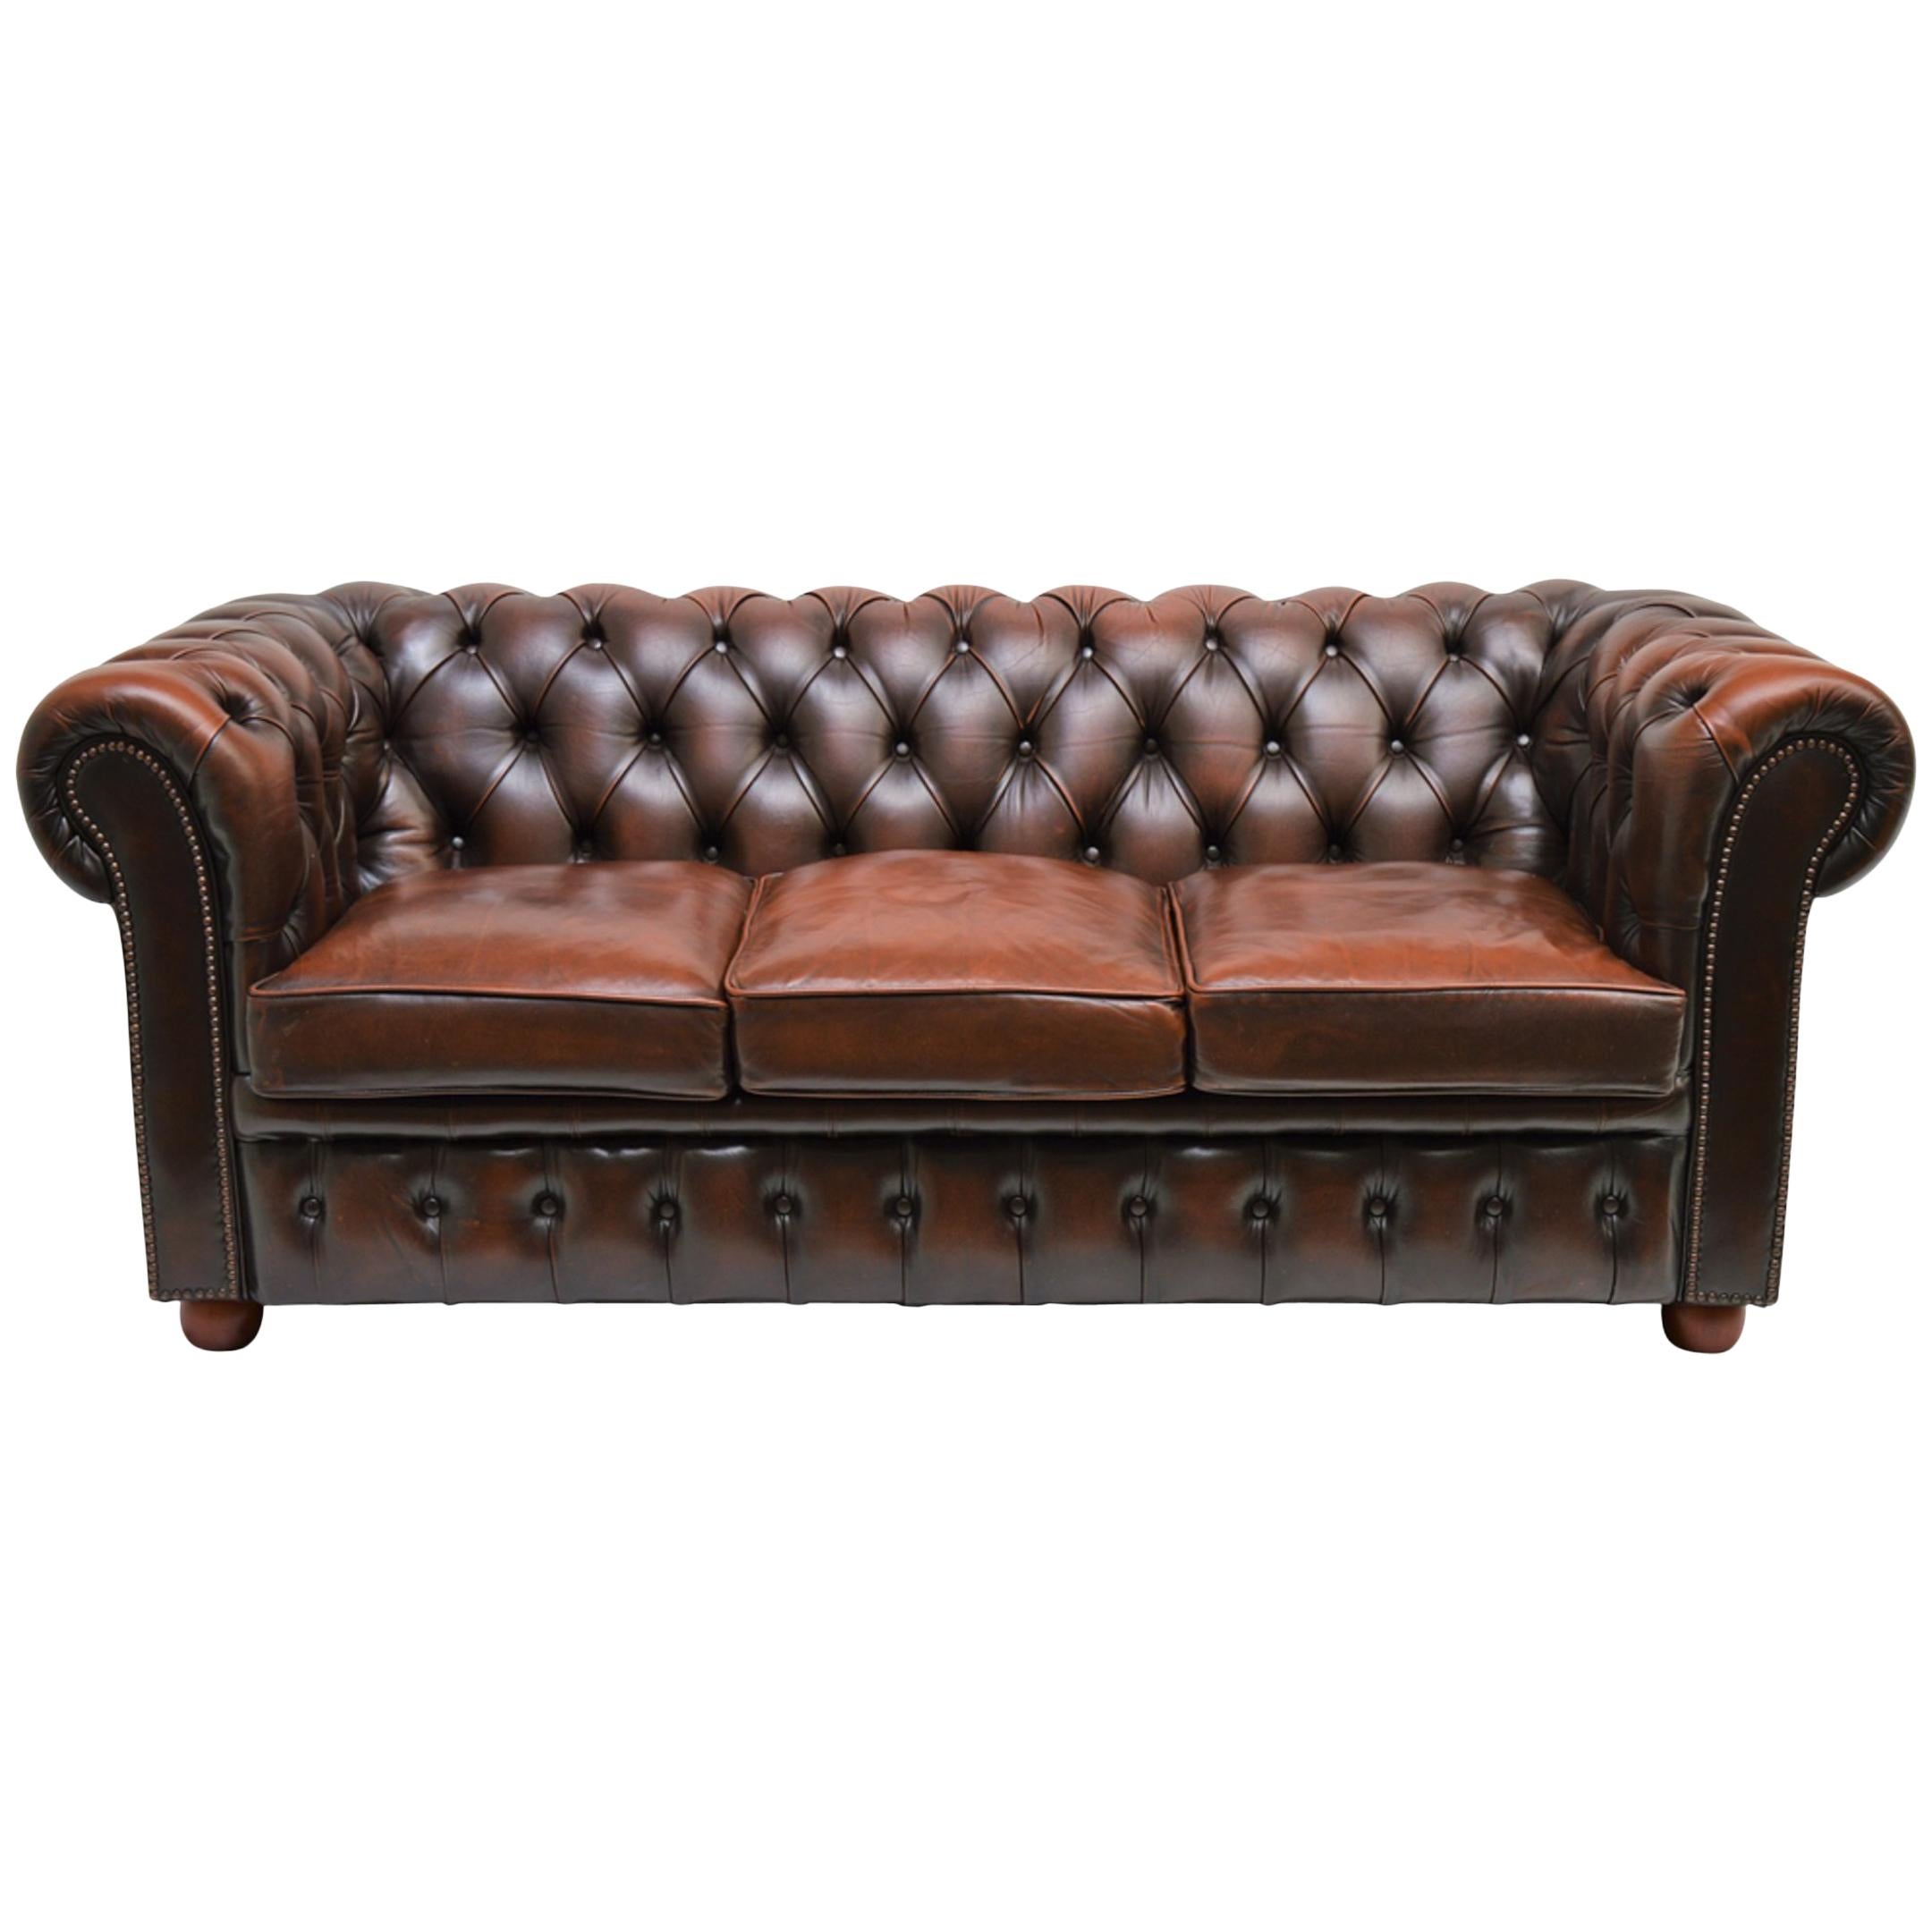 Traditional Vintage Delta Chesterfield Three and Two/Seat Settee For Sale